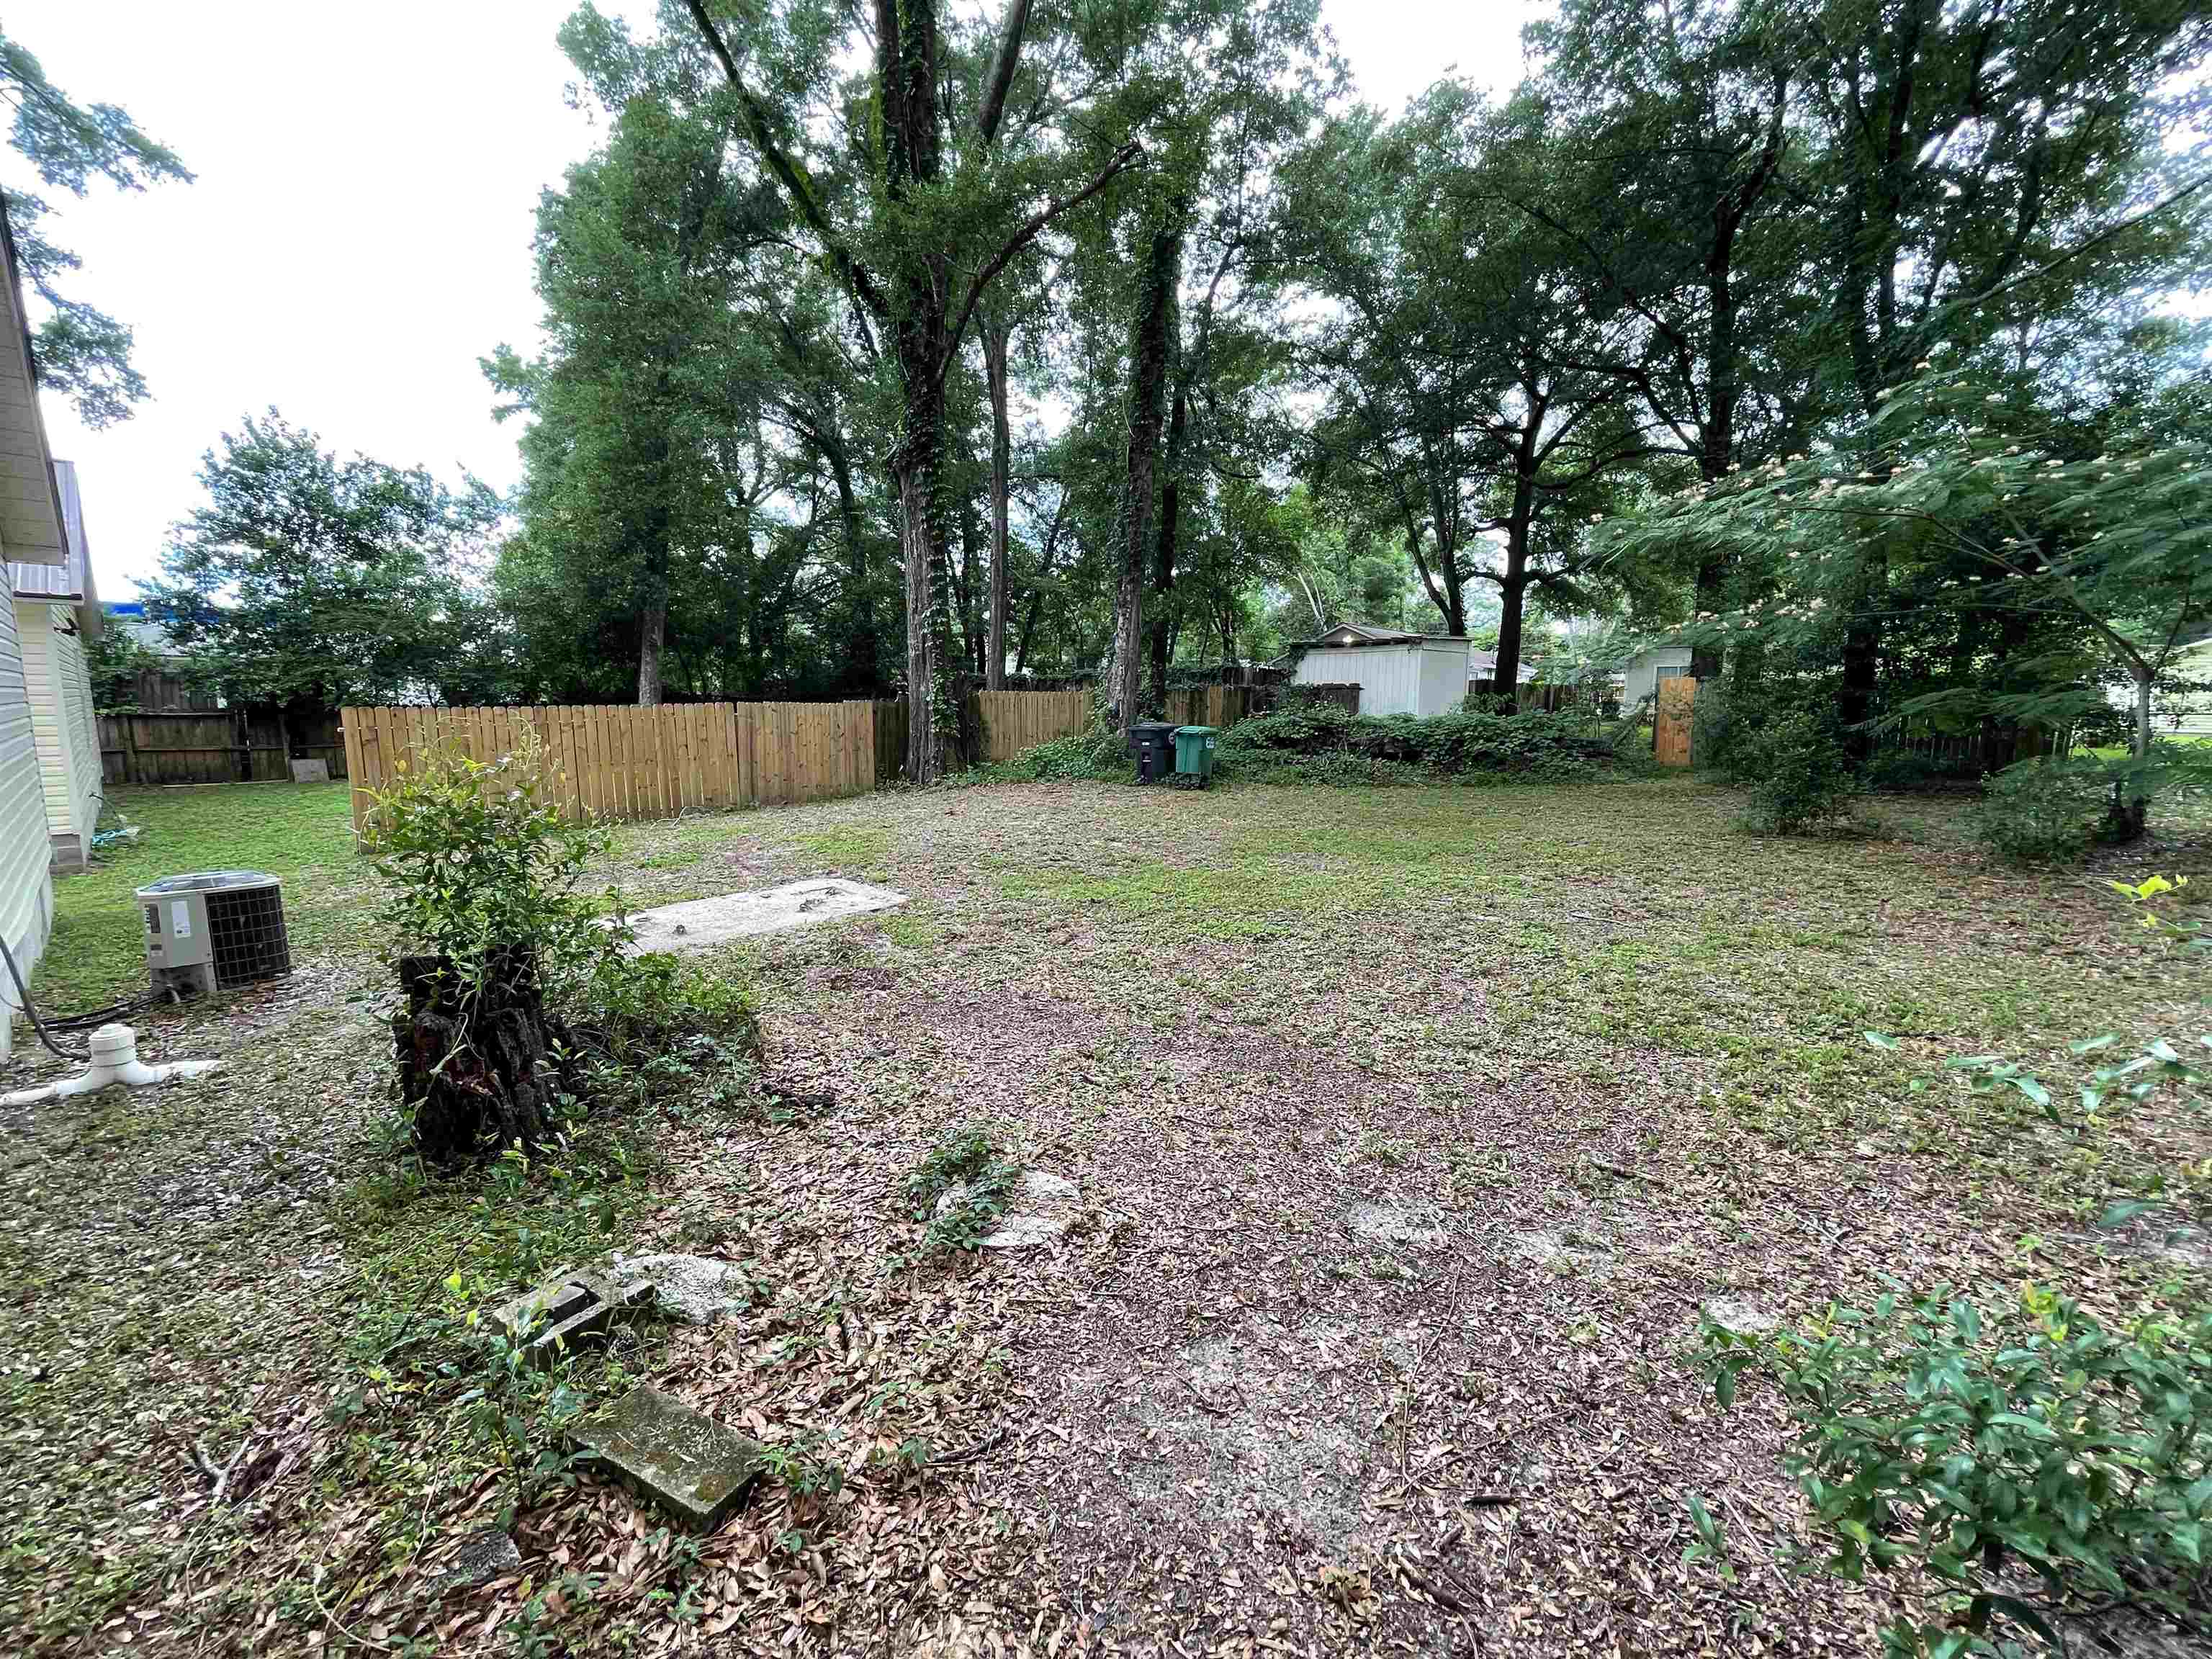 5916 Orchid Seed Ln,TALLAHASSEE,Florida 32305,4 Bedrooms Bedrooms,2 BathroomsBathrooms,Detached single family,5916 Orchid Seed Ln,368859